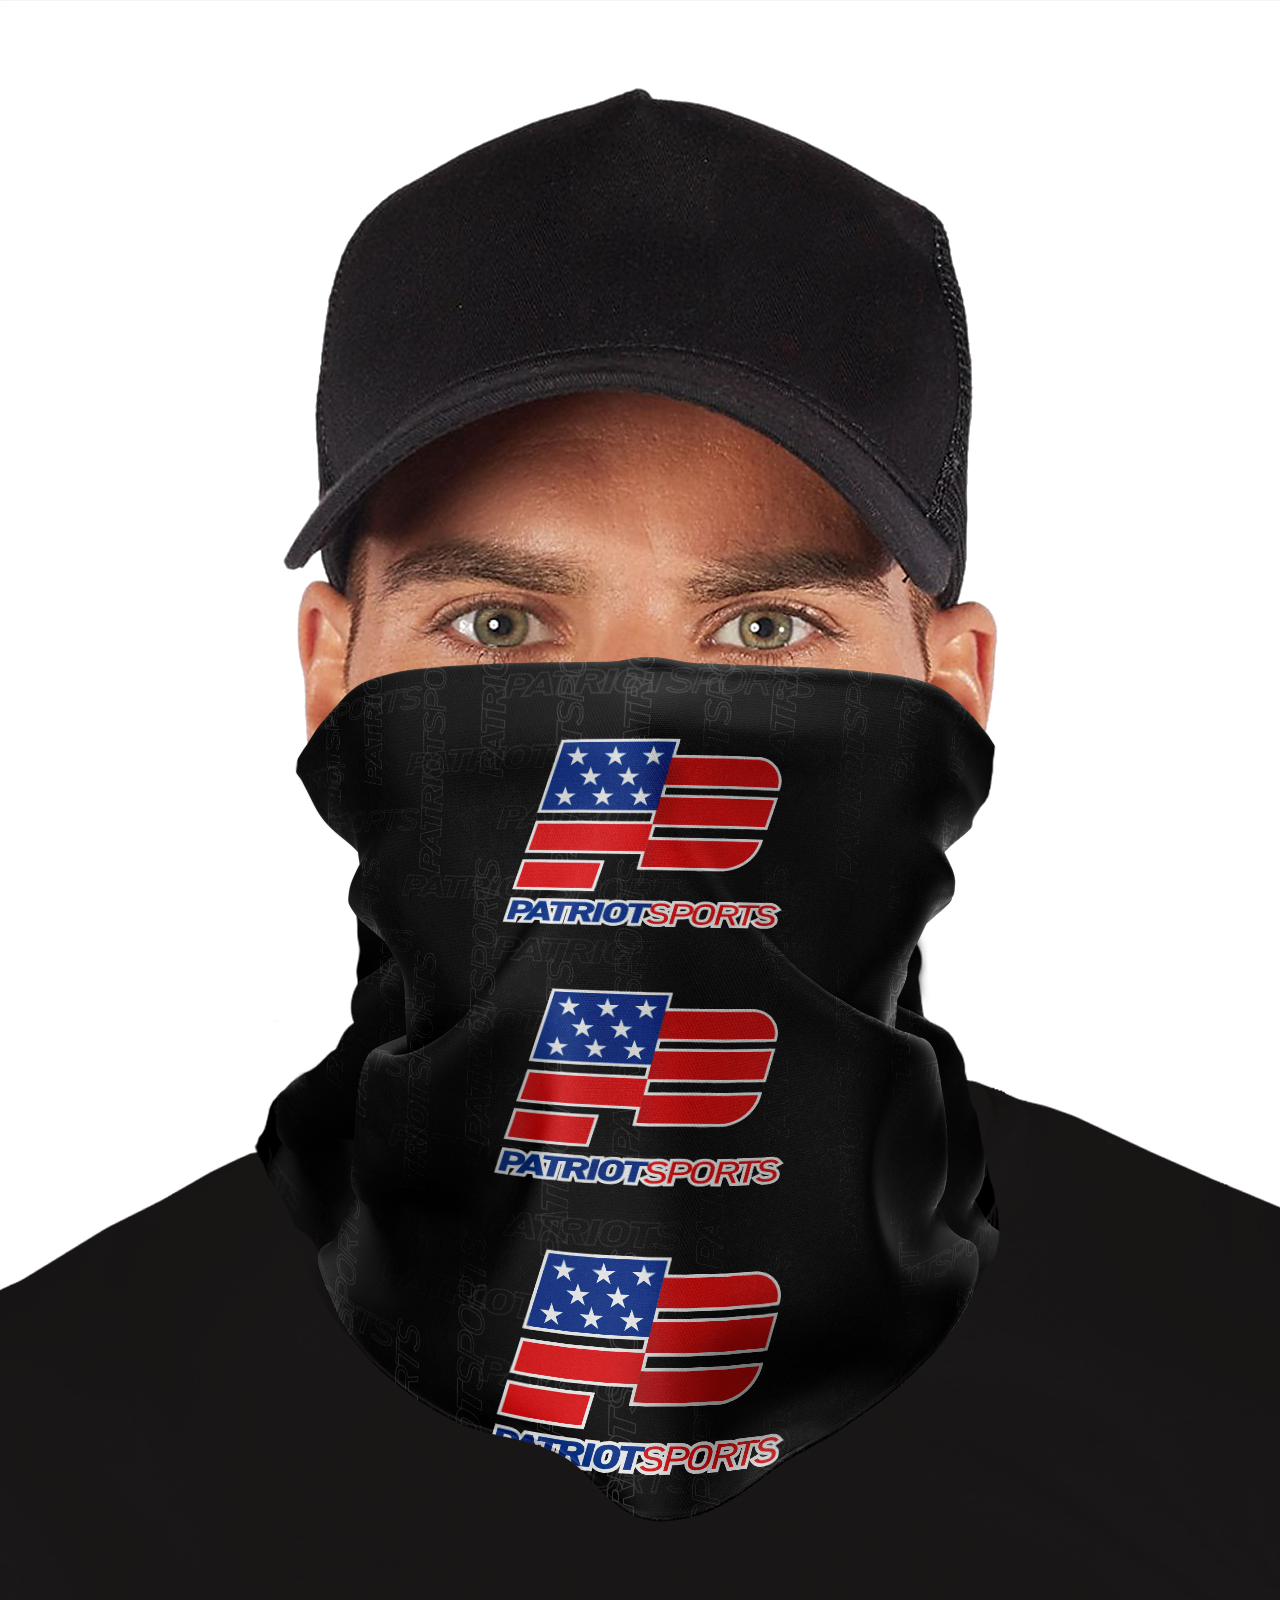 Patriot Sports  Sideline Gaiter (Multipurpose Face Mask) Actual   View  if you wear  it half face. 